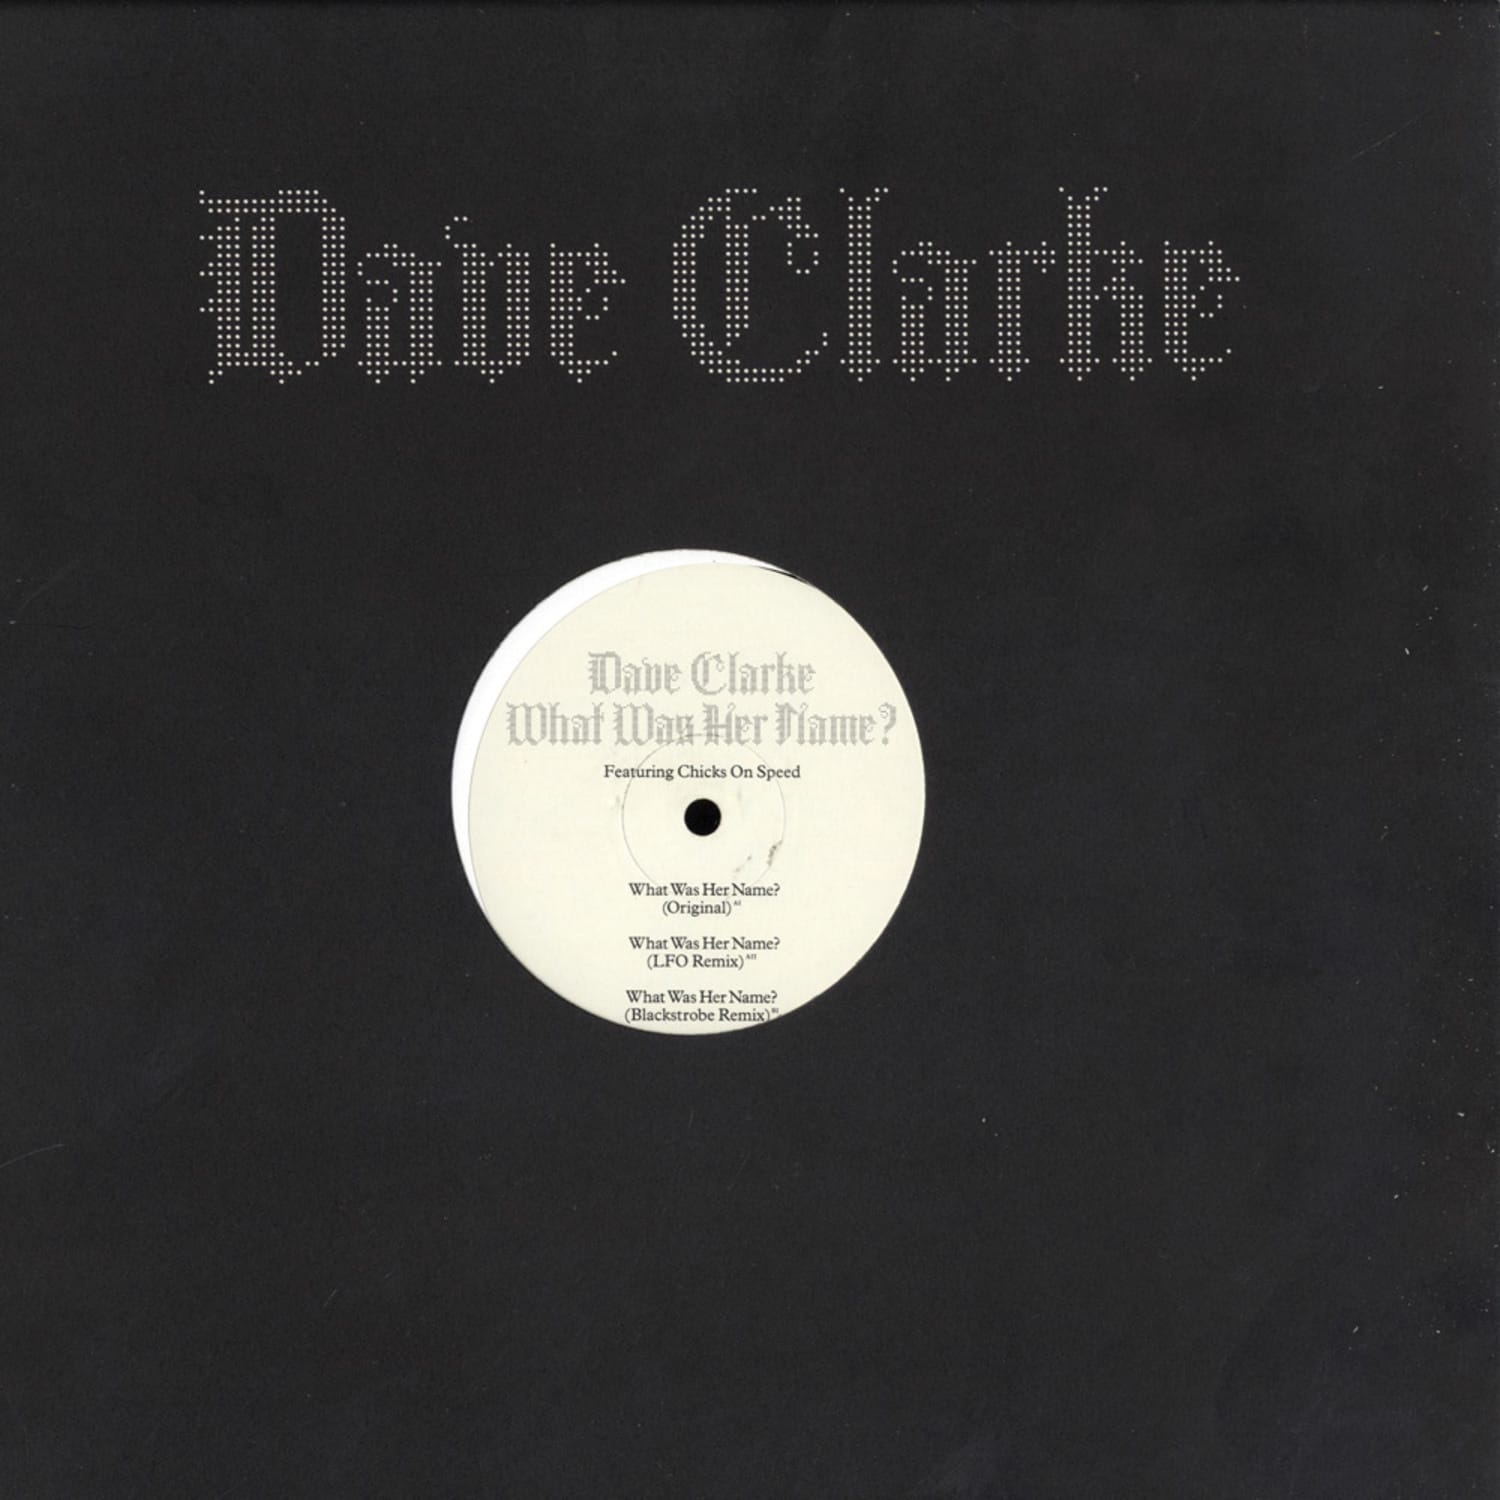 Dave Clarke - WHAT WAS HER NAME ? 